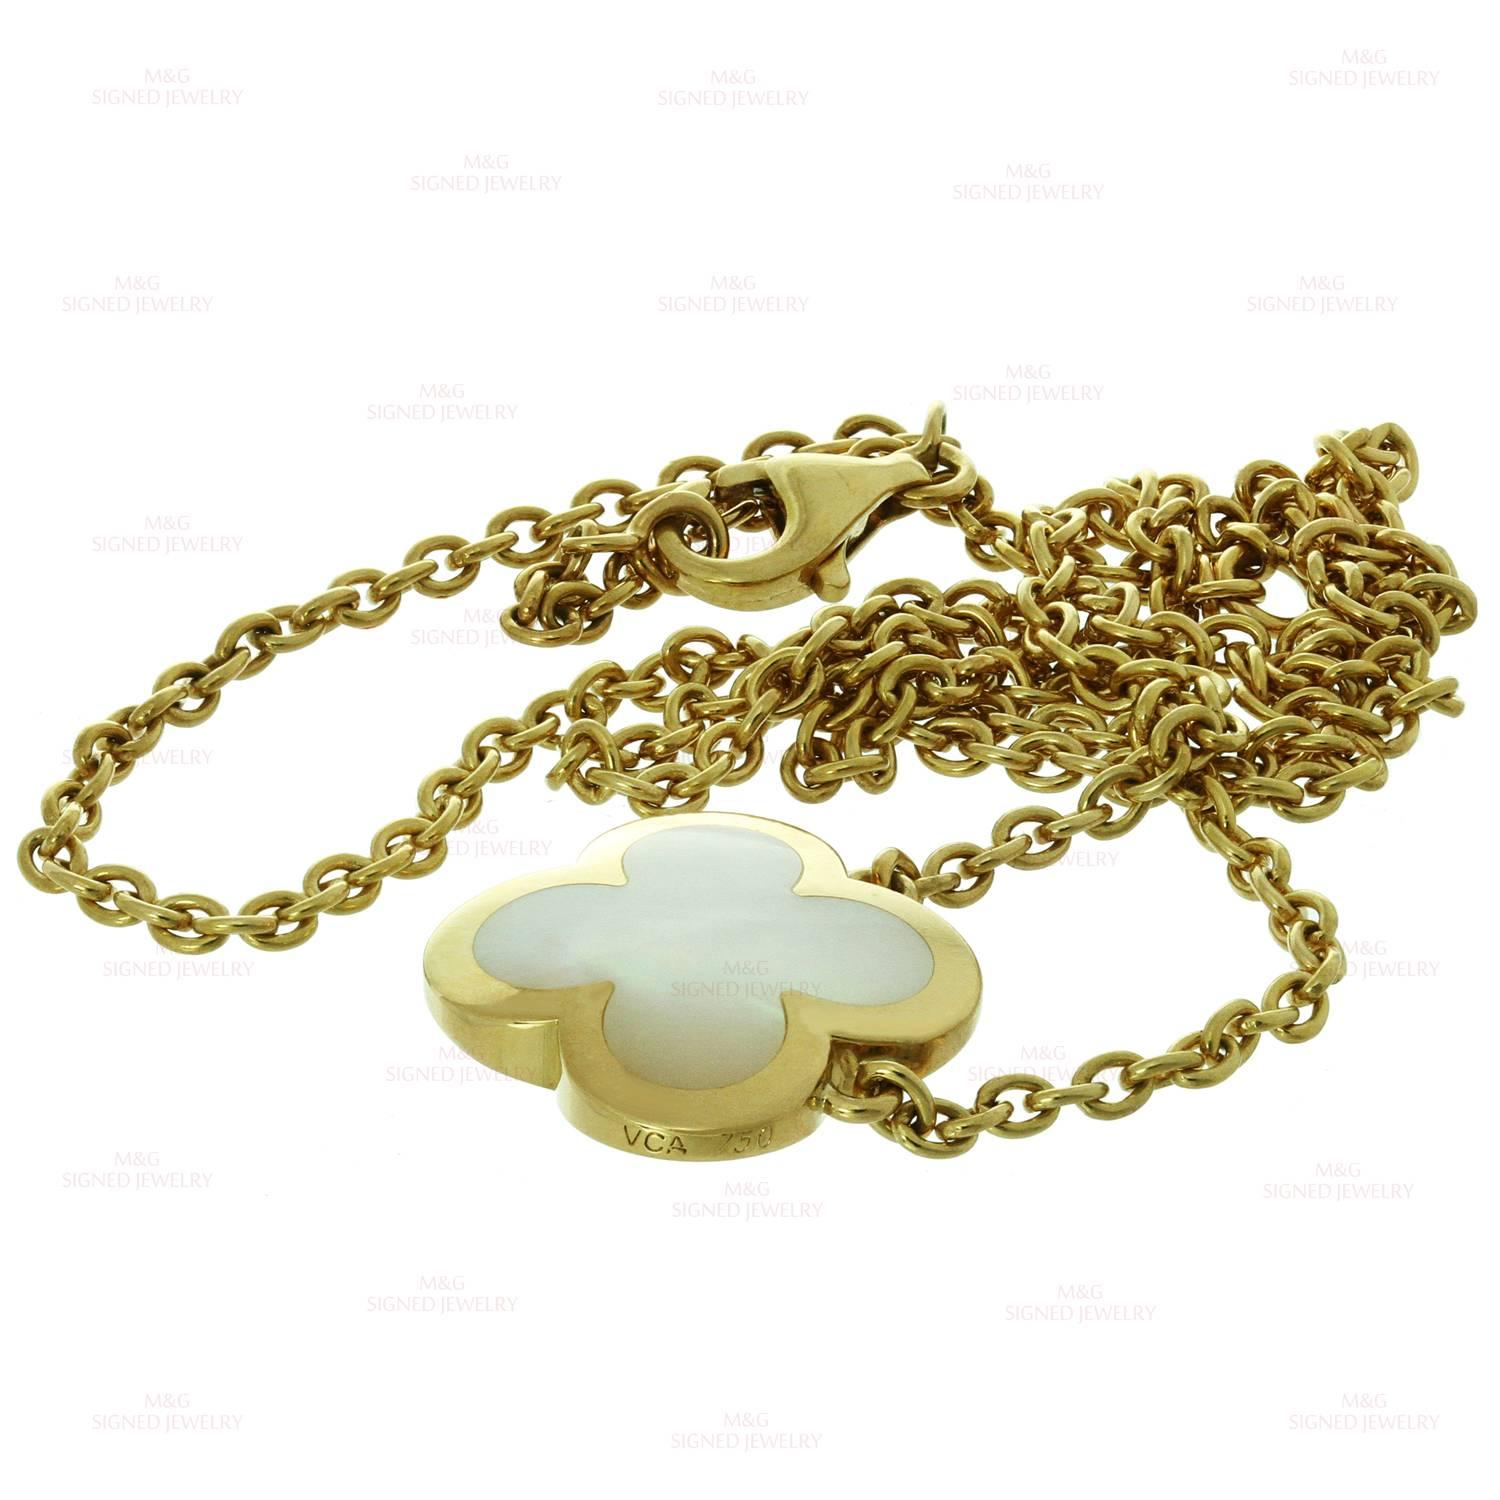 Van Cleef & Arpels Pure Alhambra Mother-of-Pearl Yellow Gold Pendant Necklace 2